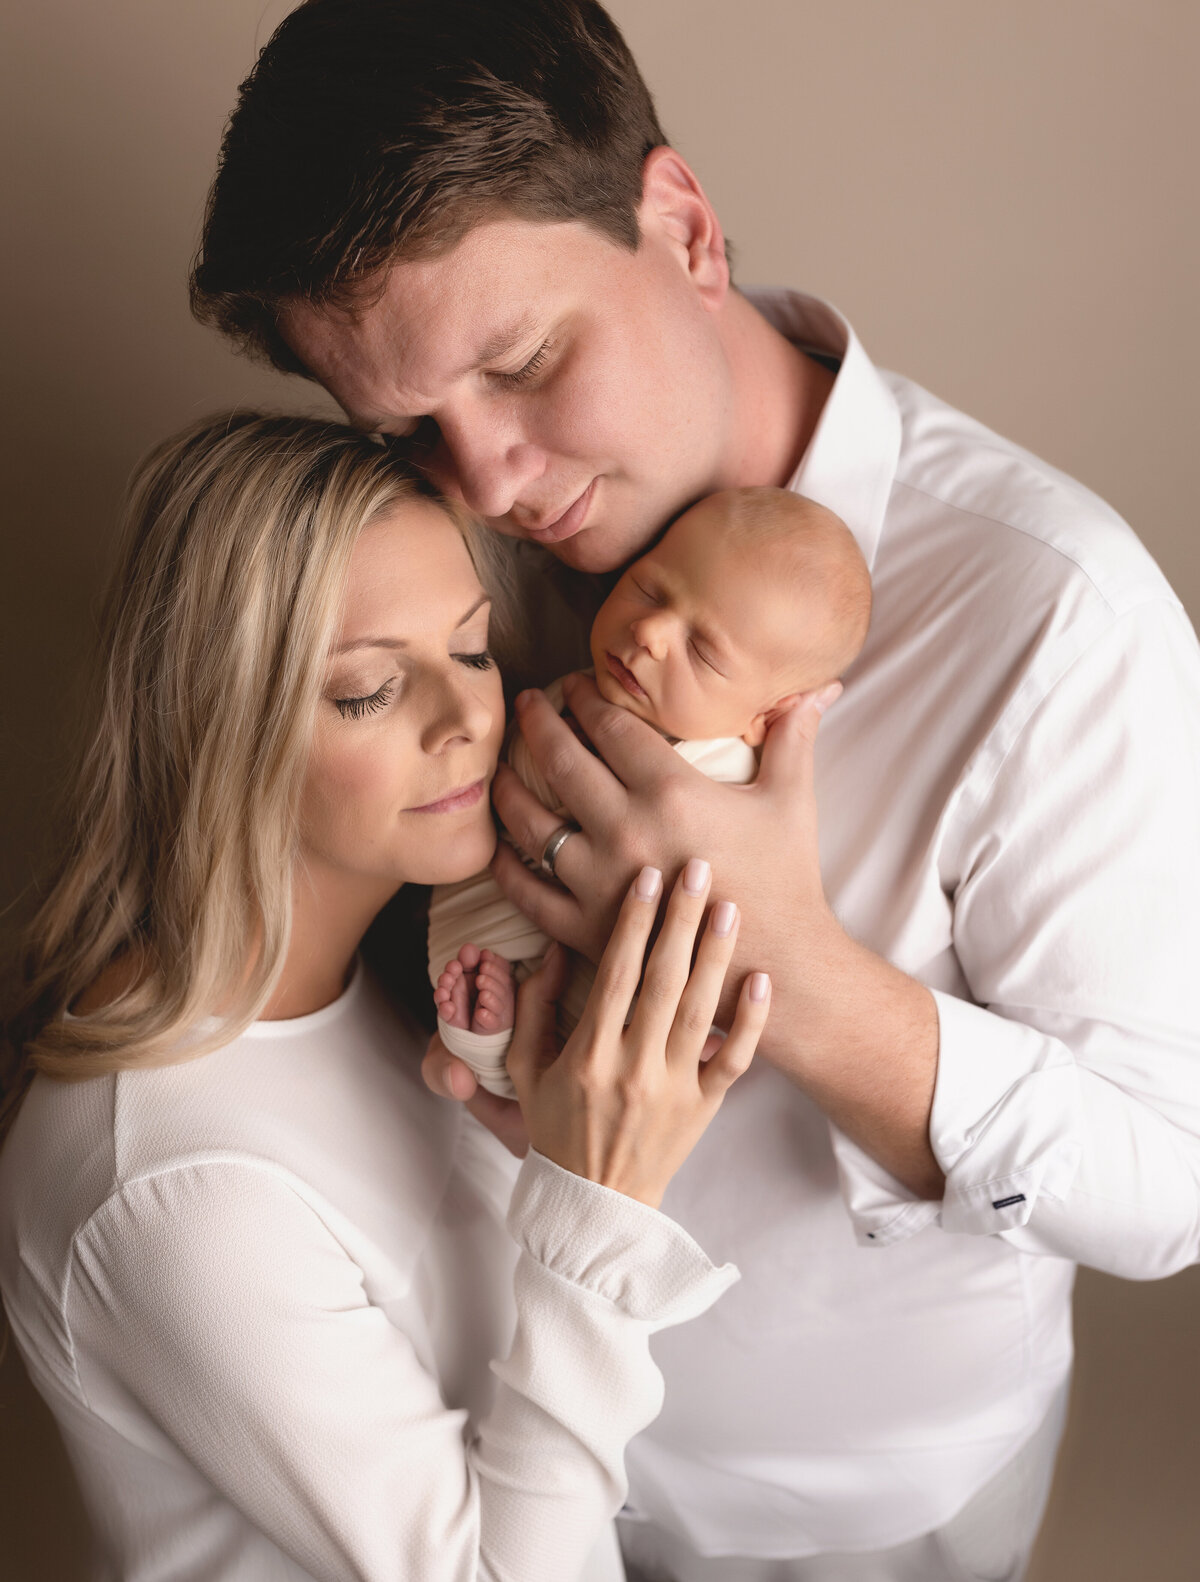 Family newborn photo in West Palm Beach and Boca Raton newborn photography studio. Baby is wrapped in a cream knit swaddle. Dad is holding baby's back against his chest, one hand under baby's bum, the other on baby's chest. Mom is facing dad and baby and resting her hand on top of dad's forehand. Mom and Dad have their heads touching and eyes closed.